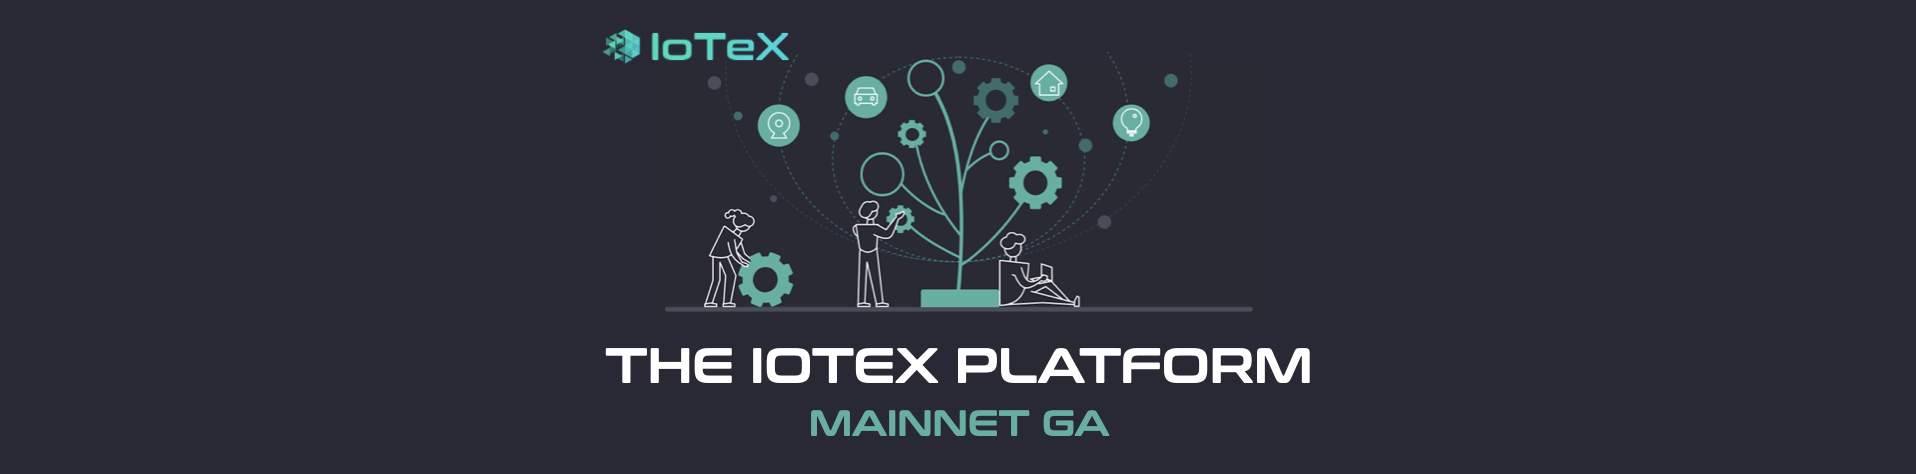 The IoTeX Platform — Optimized for the Internet of Trusted Things